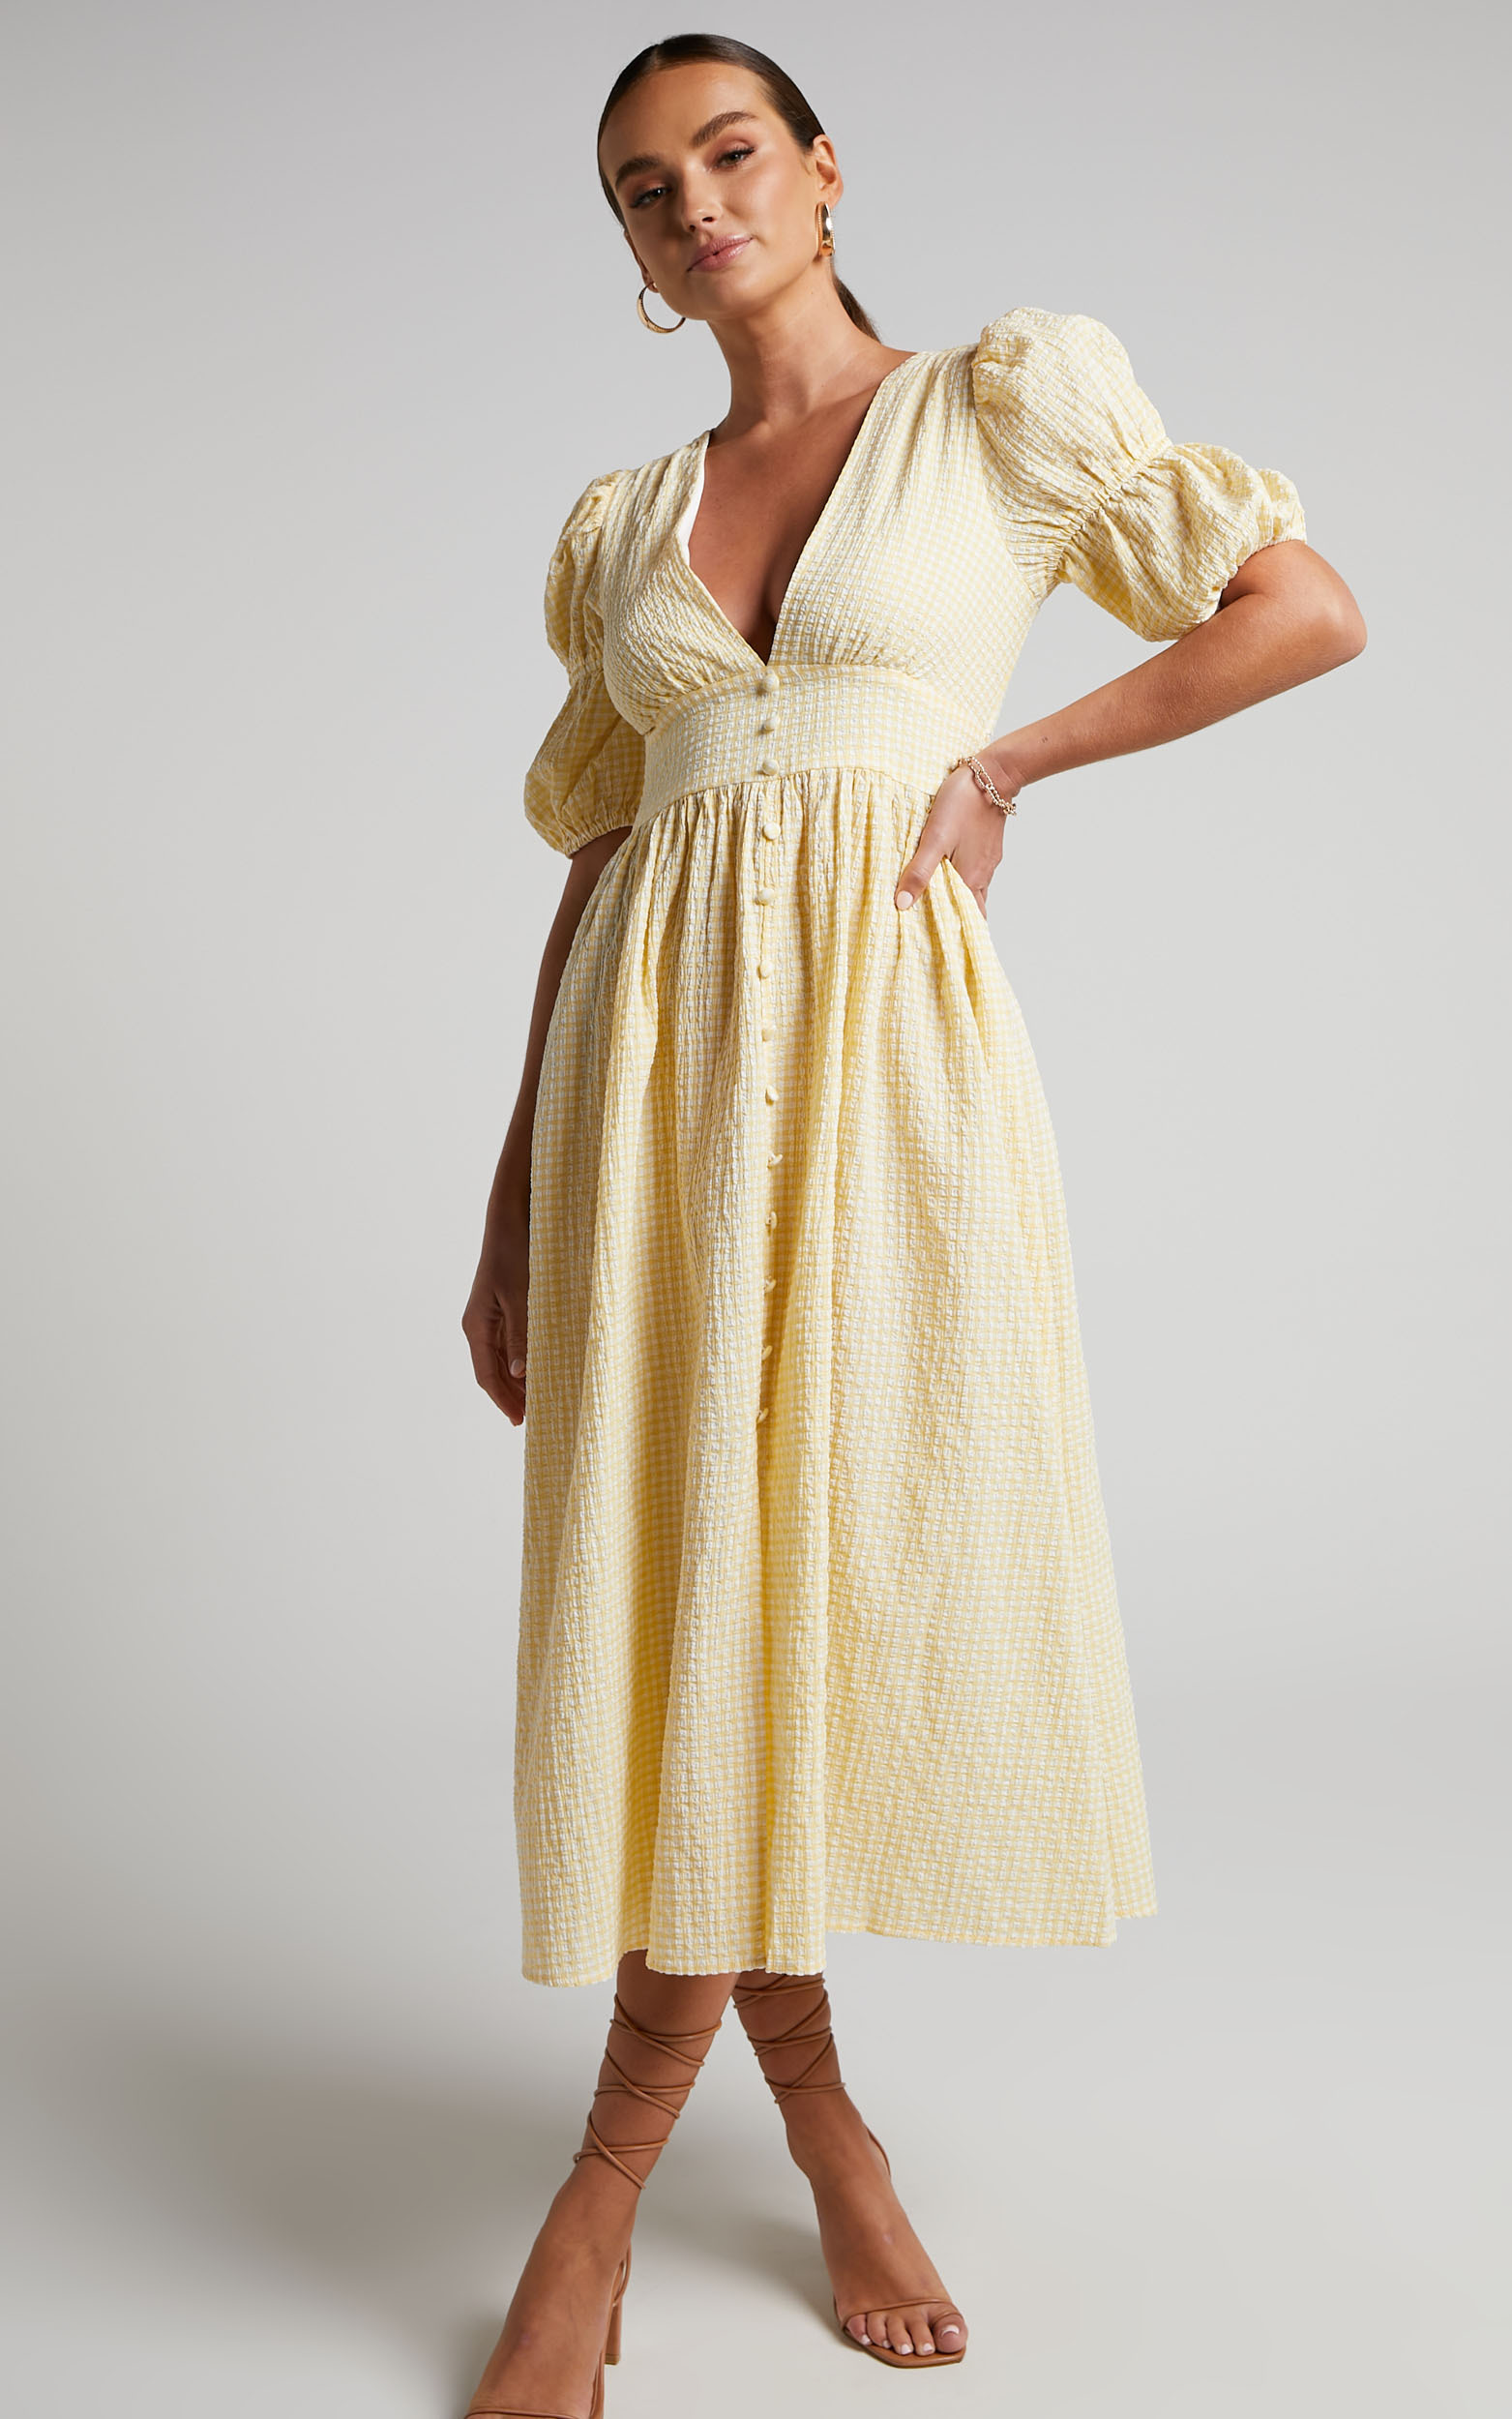 Augusta Midi Dress - Button Detail V Neck Double Puff Sleeve Dress in Butter Yellow - 04, YEL1, hi-res image number null